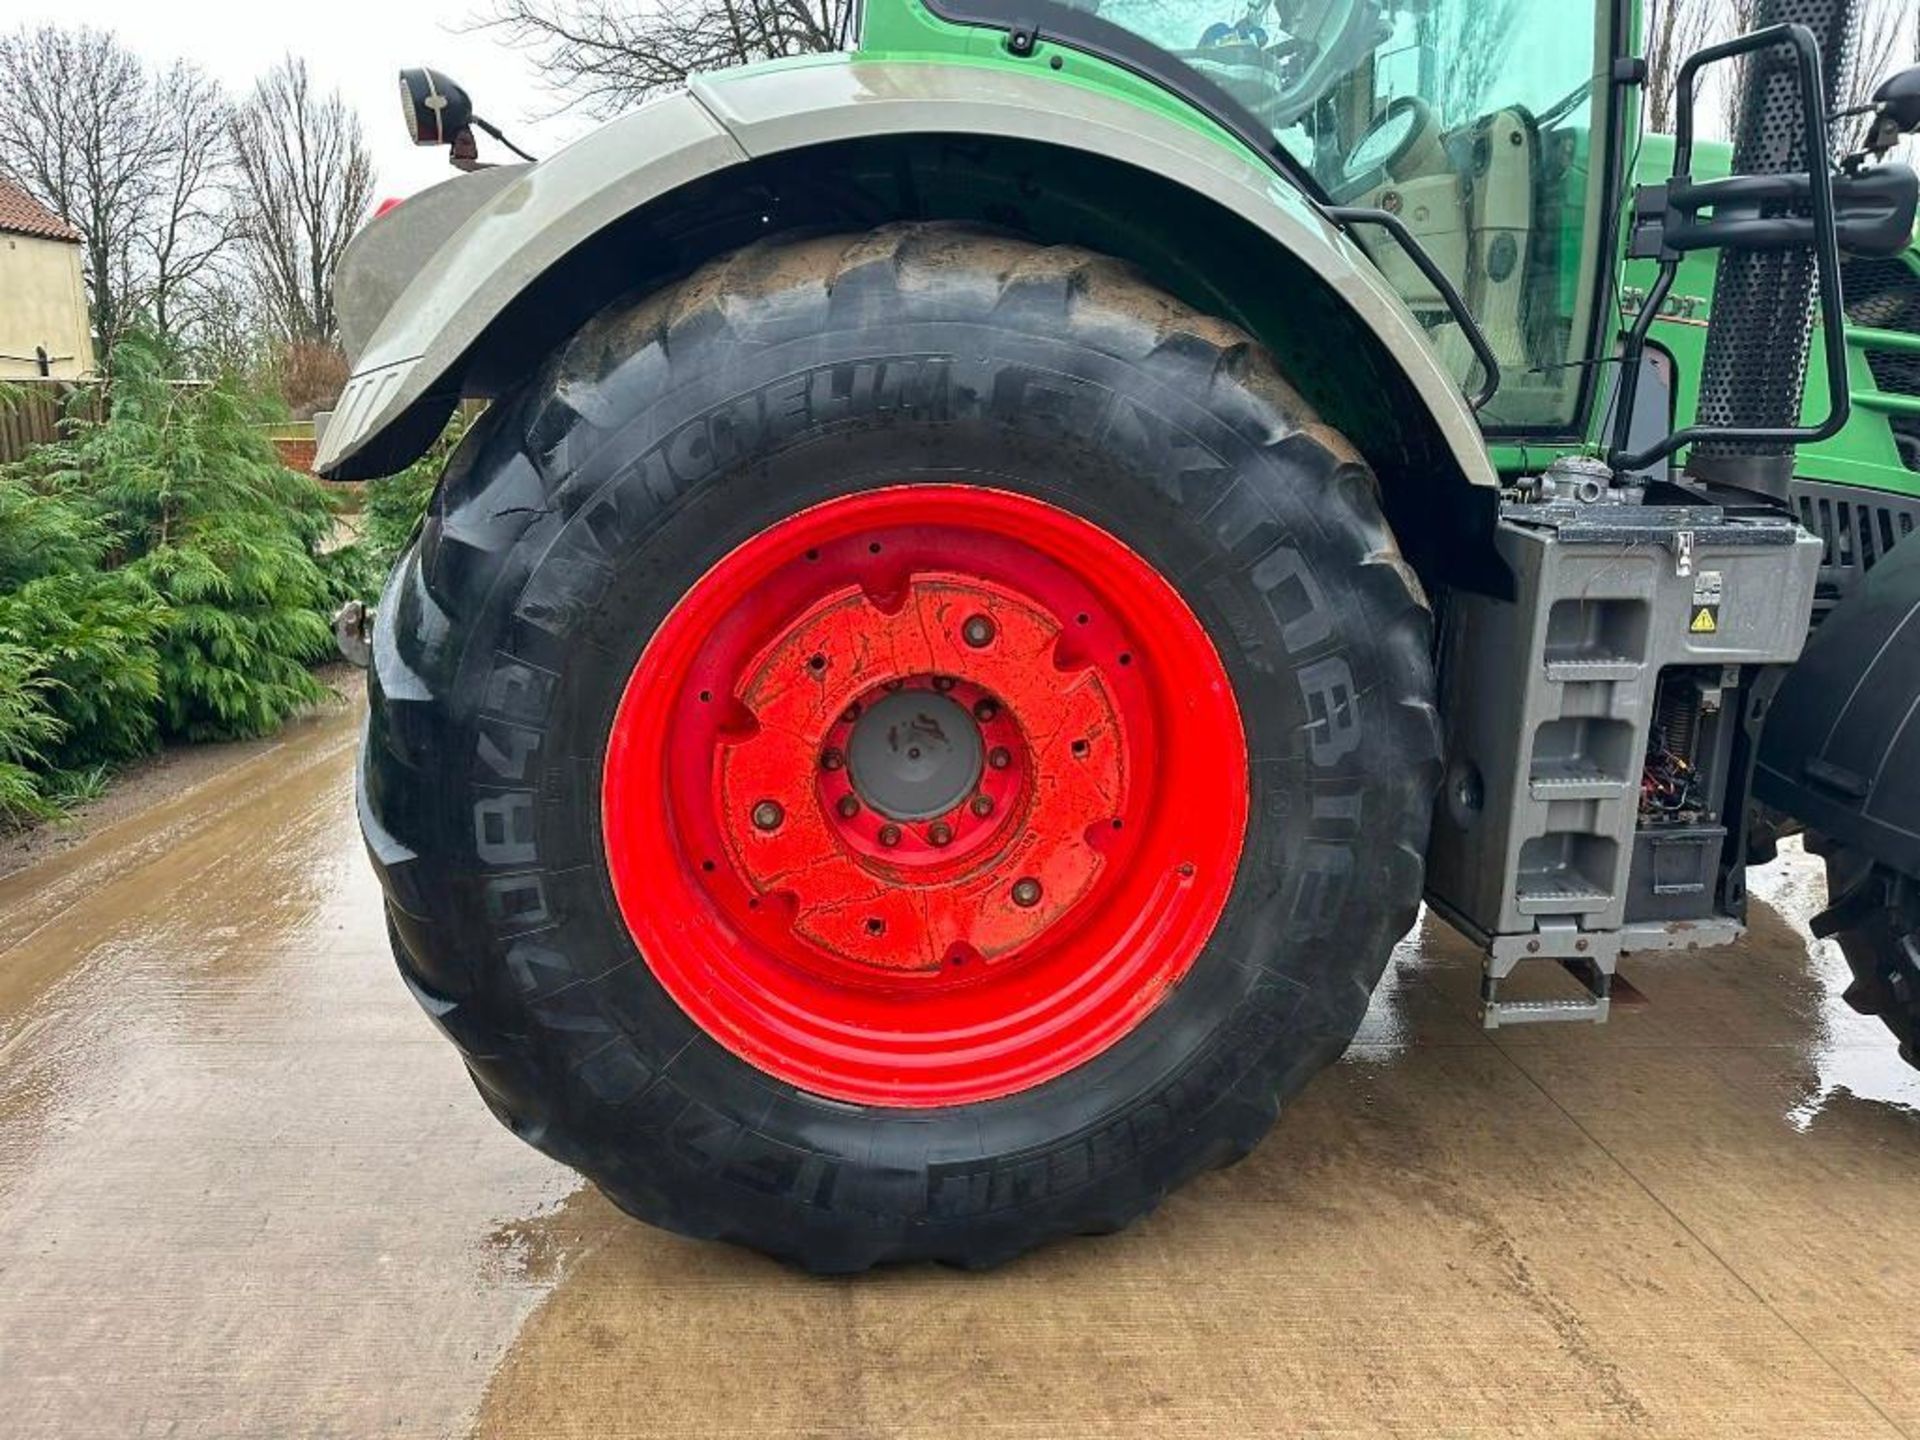 2013 Fendt 828 Vario tractor, 4wd, front linkage, front spool valves, 4No rear spool valves, Bill Be - Image 21 of 23